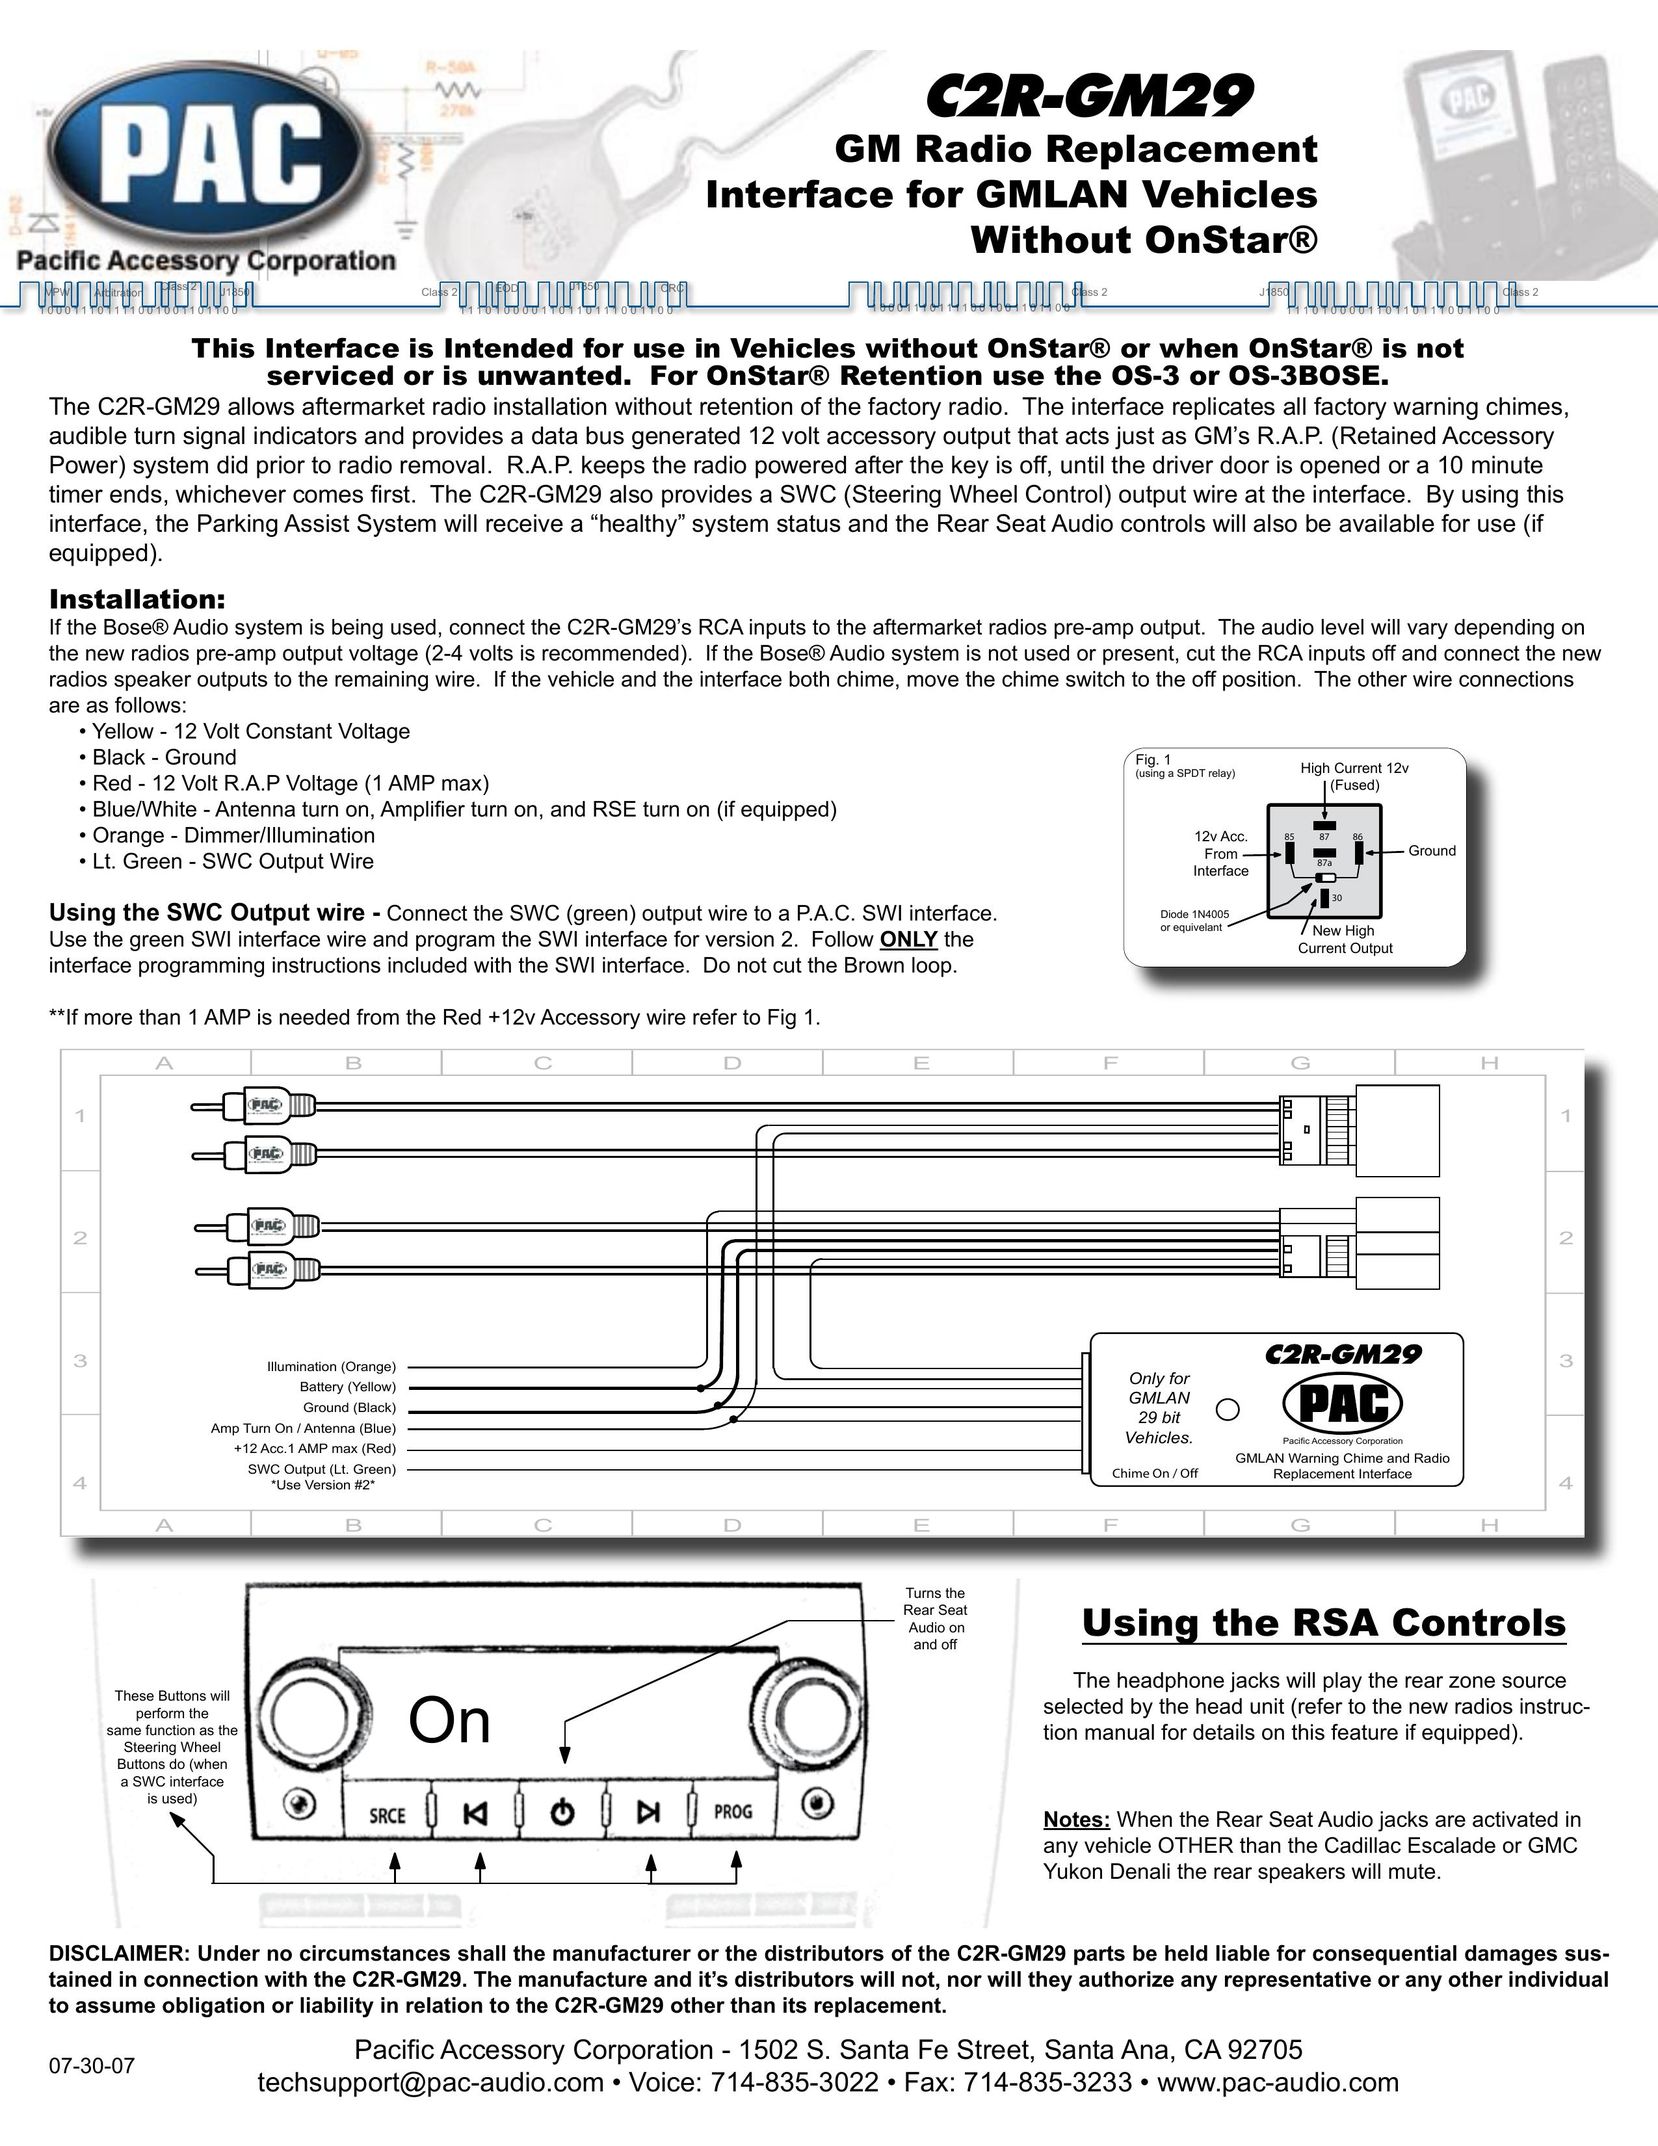 PAC C2R-GM29 Car Stereo System User Manual